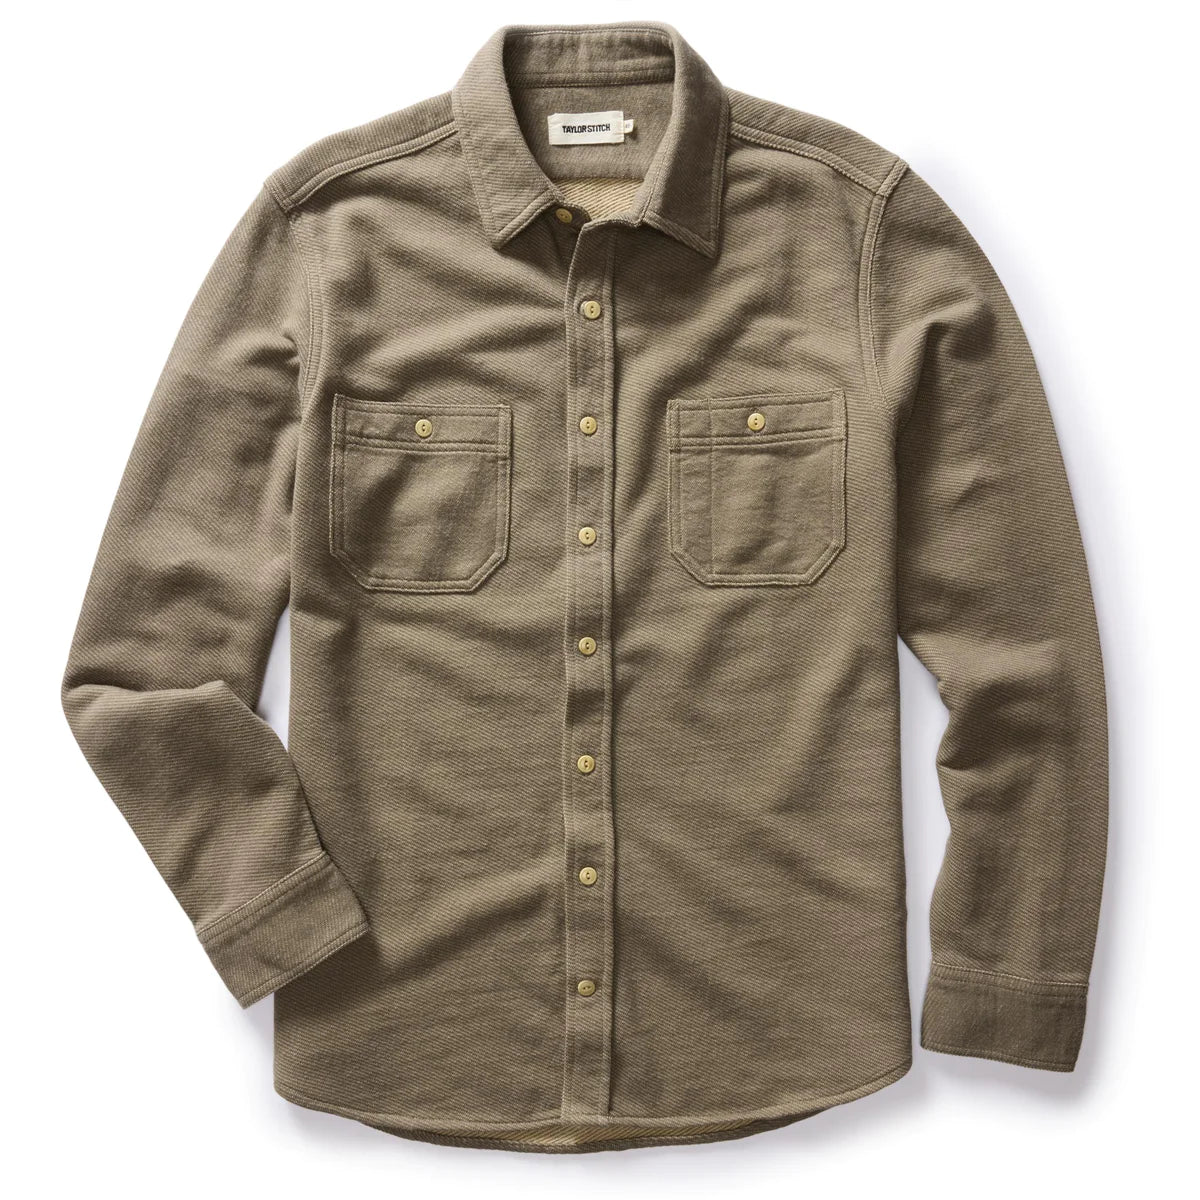 Taylor Stitch - The Utility Shirt in Fatigue Olive French Terry Twill Knit